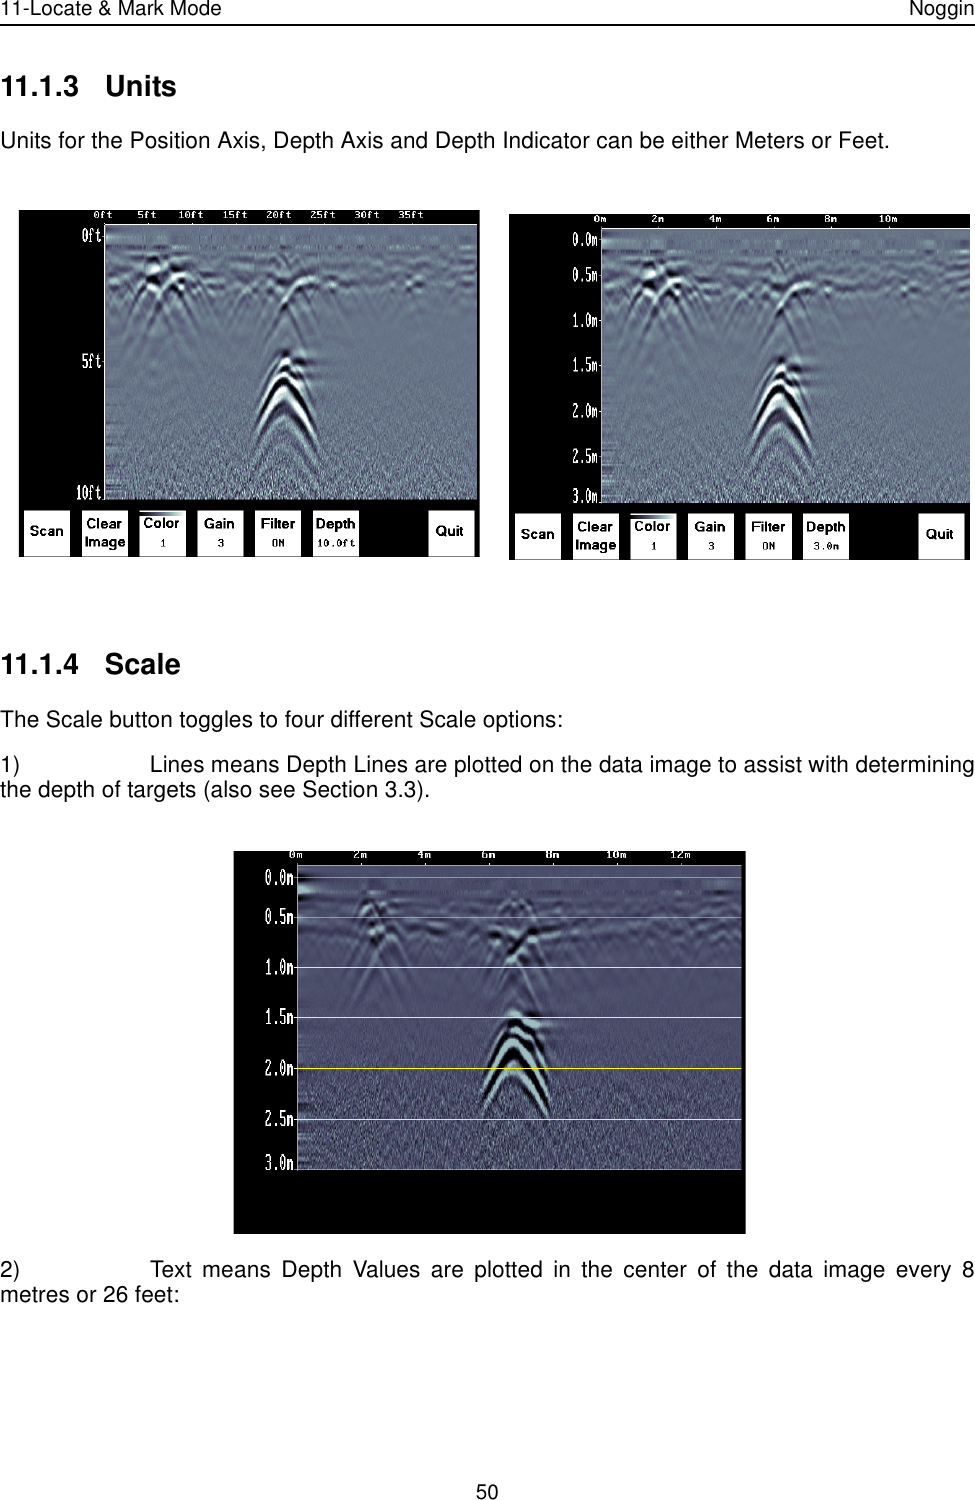 11-Locate &amp; Mark Mode Noggin5011.1.3 UnitsUnits for the Position Axis, Depth Axis and Depth Indicator can be either Meters or Feet.11.1.4 ScaleThe Scale button toggles to four different Scale options:1) Lines means Depth Lines are plotted on the data image to assist with determiningthe depth of targets (also see Section 3.3).2) Text means Depth Values are plotted in the center of the data image every 8metres or 26 feet: